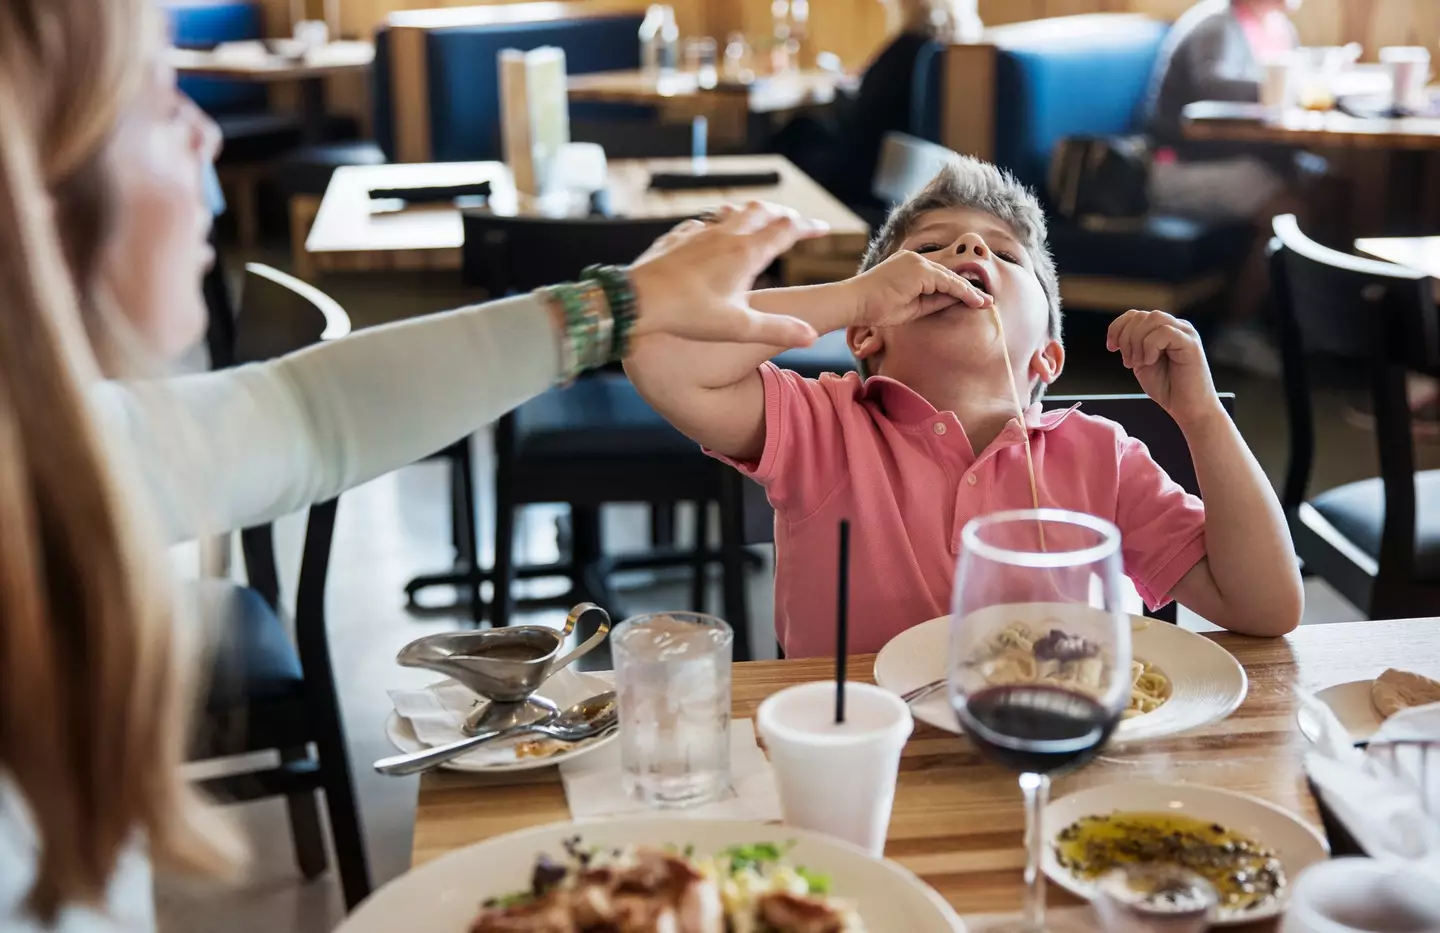 One American restaurant has sparked a debate after charging customers a 'bad parent fee'.